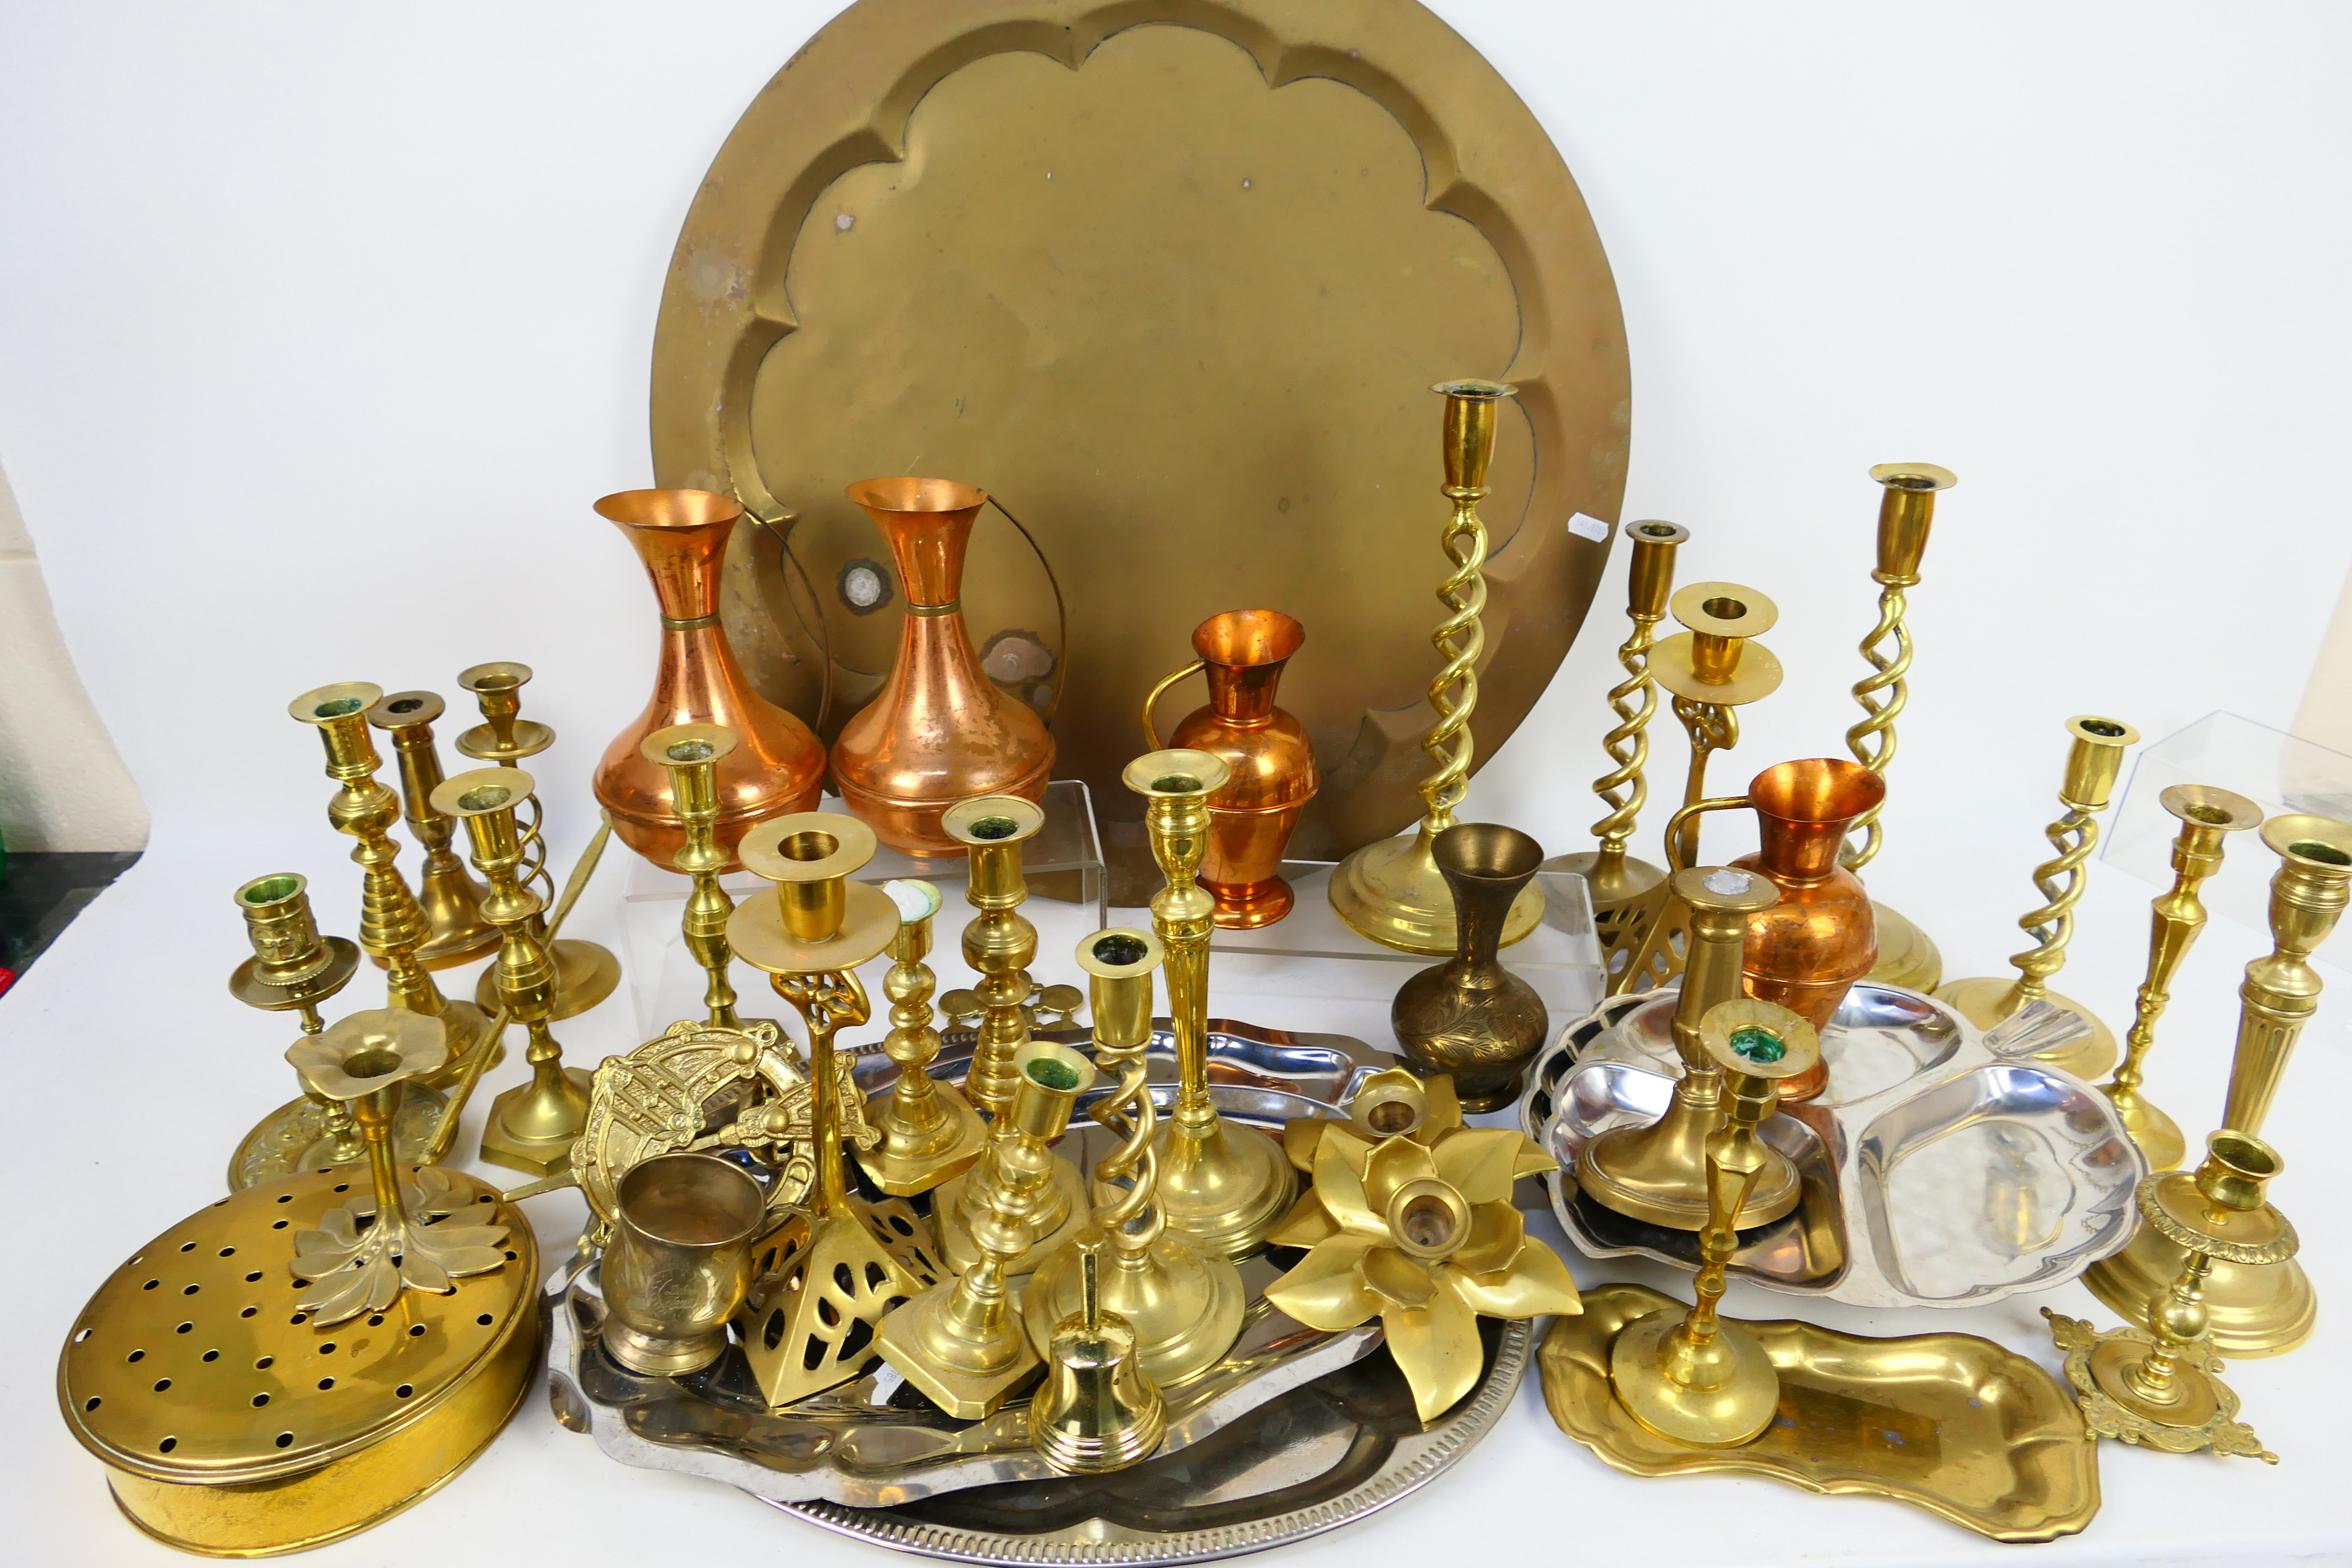 Mixed metal ware, predominantly copper and brass to include candlesticks, trays, jugs and other.